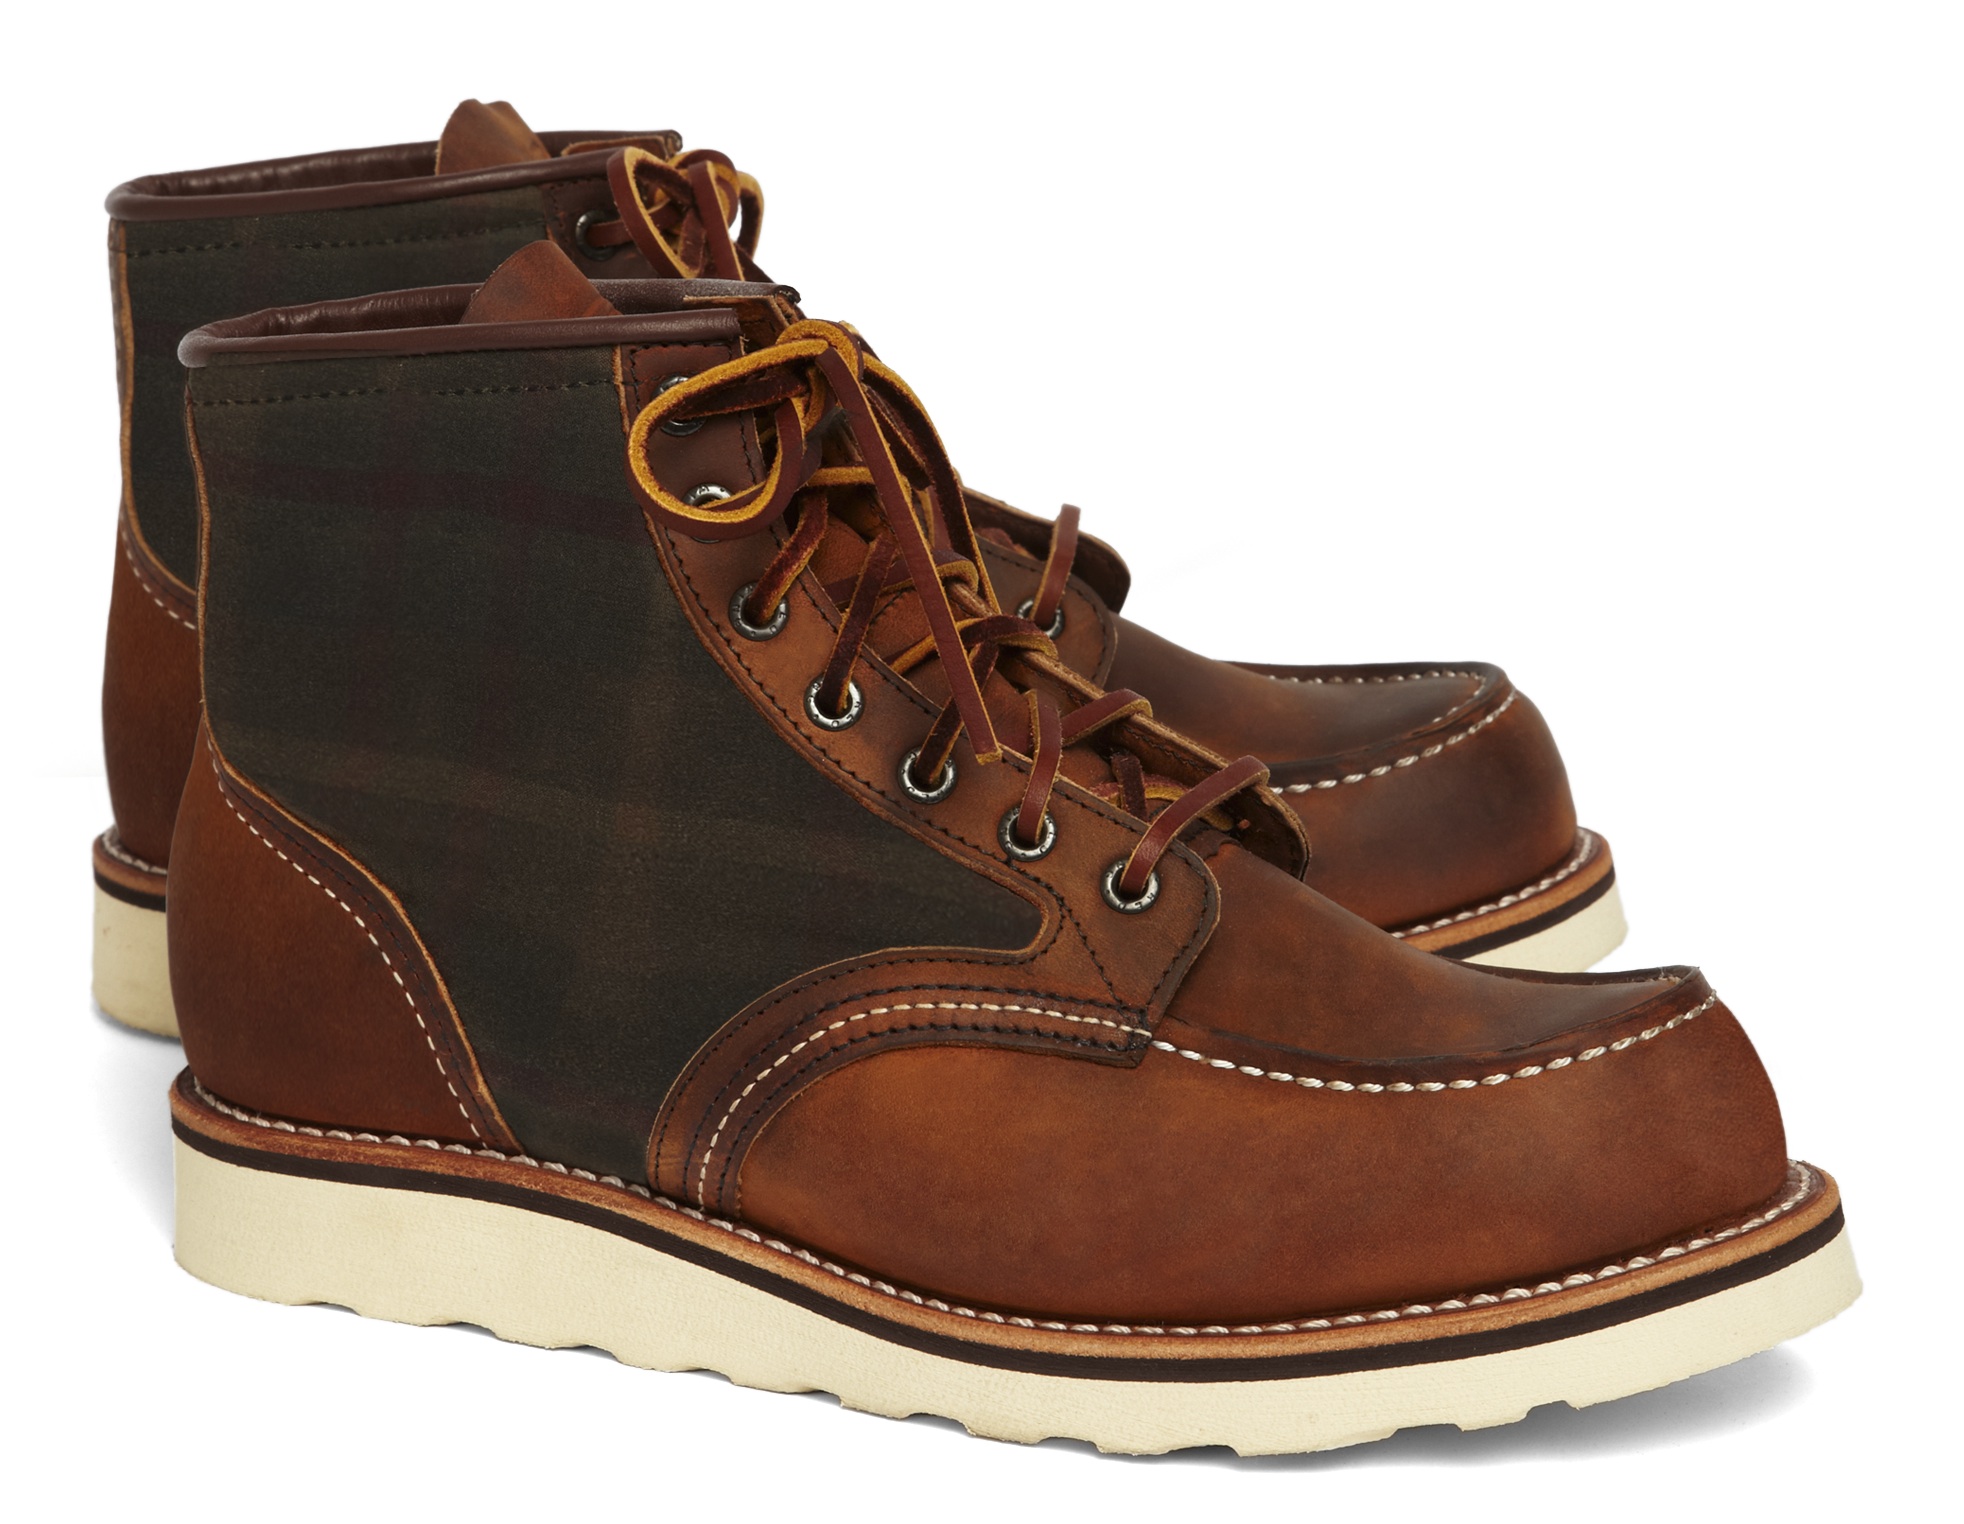 Brooks Brothers Red Wing Heritage Boots: At Least Two Things You Need ...